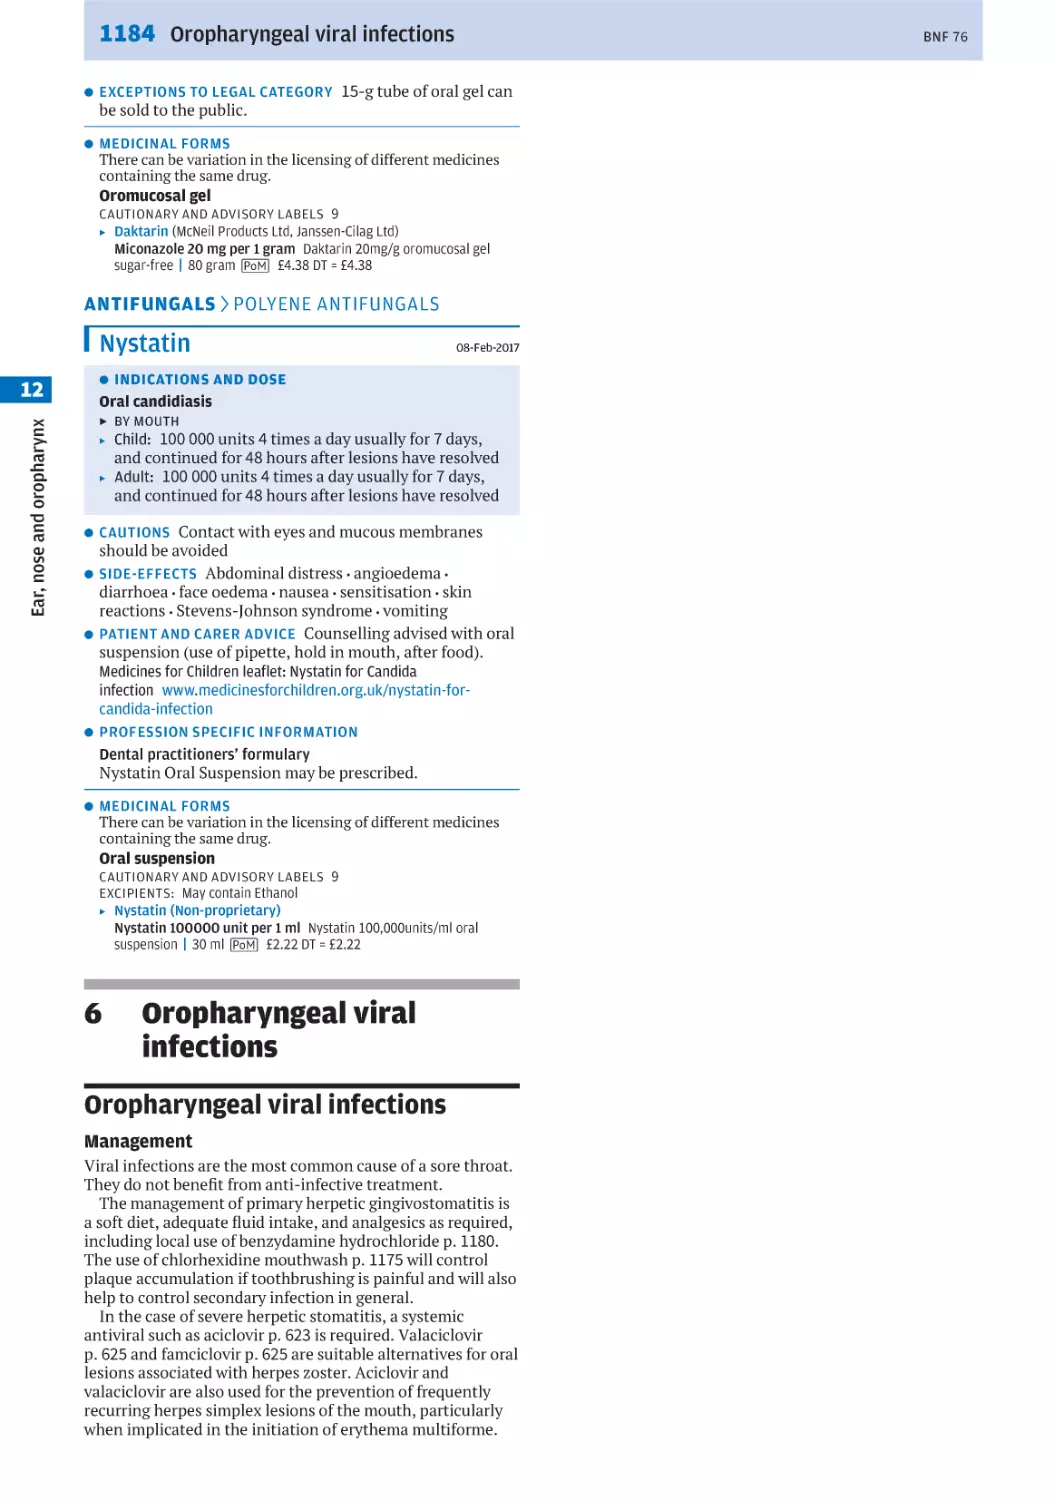 Oropharyngeal viral infections